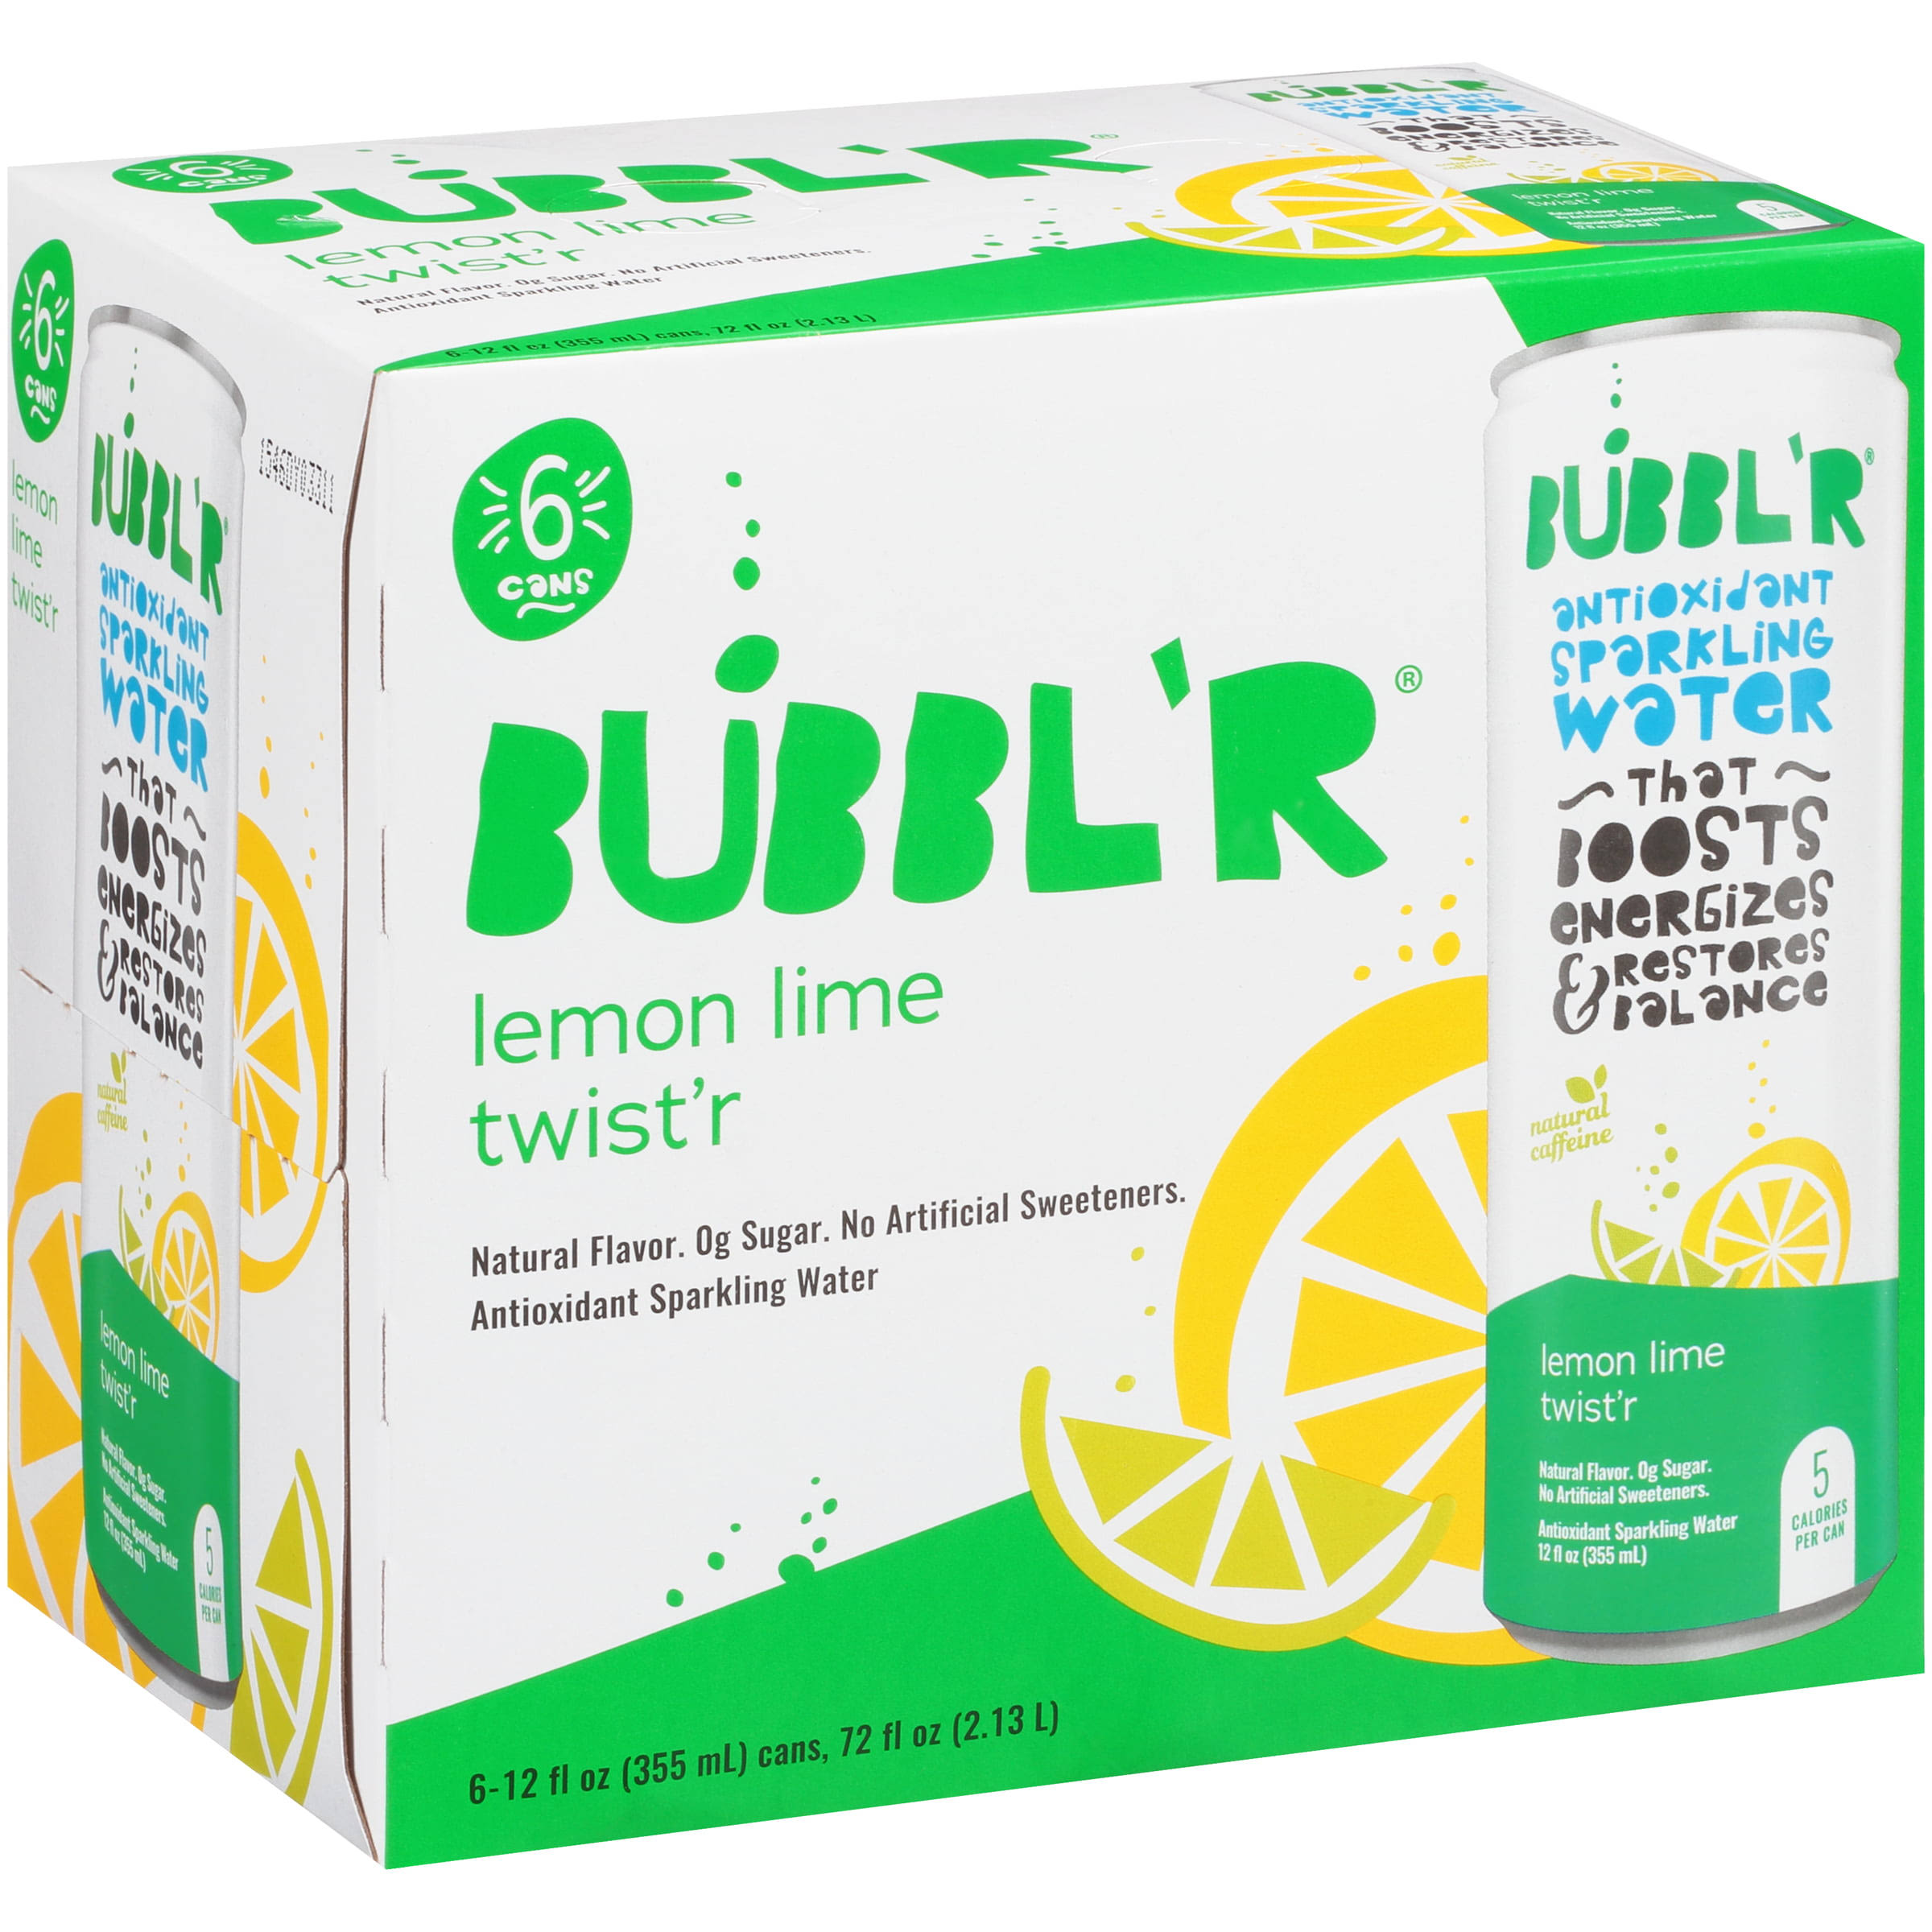 BUBBL'R Antioxidant Sparkling Water with Natural Caffeine, Zero Sugar, Natural Flavor and No Artificial Sweeteners, lemon lime twist'r, 12 Fluid Ounce